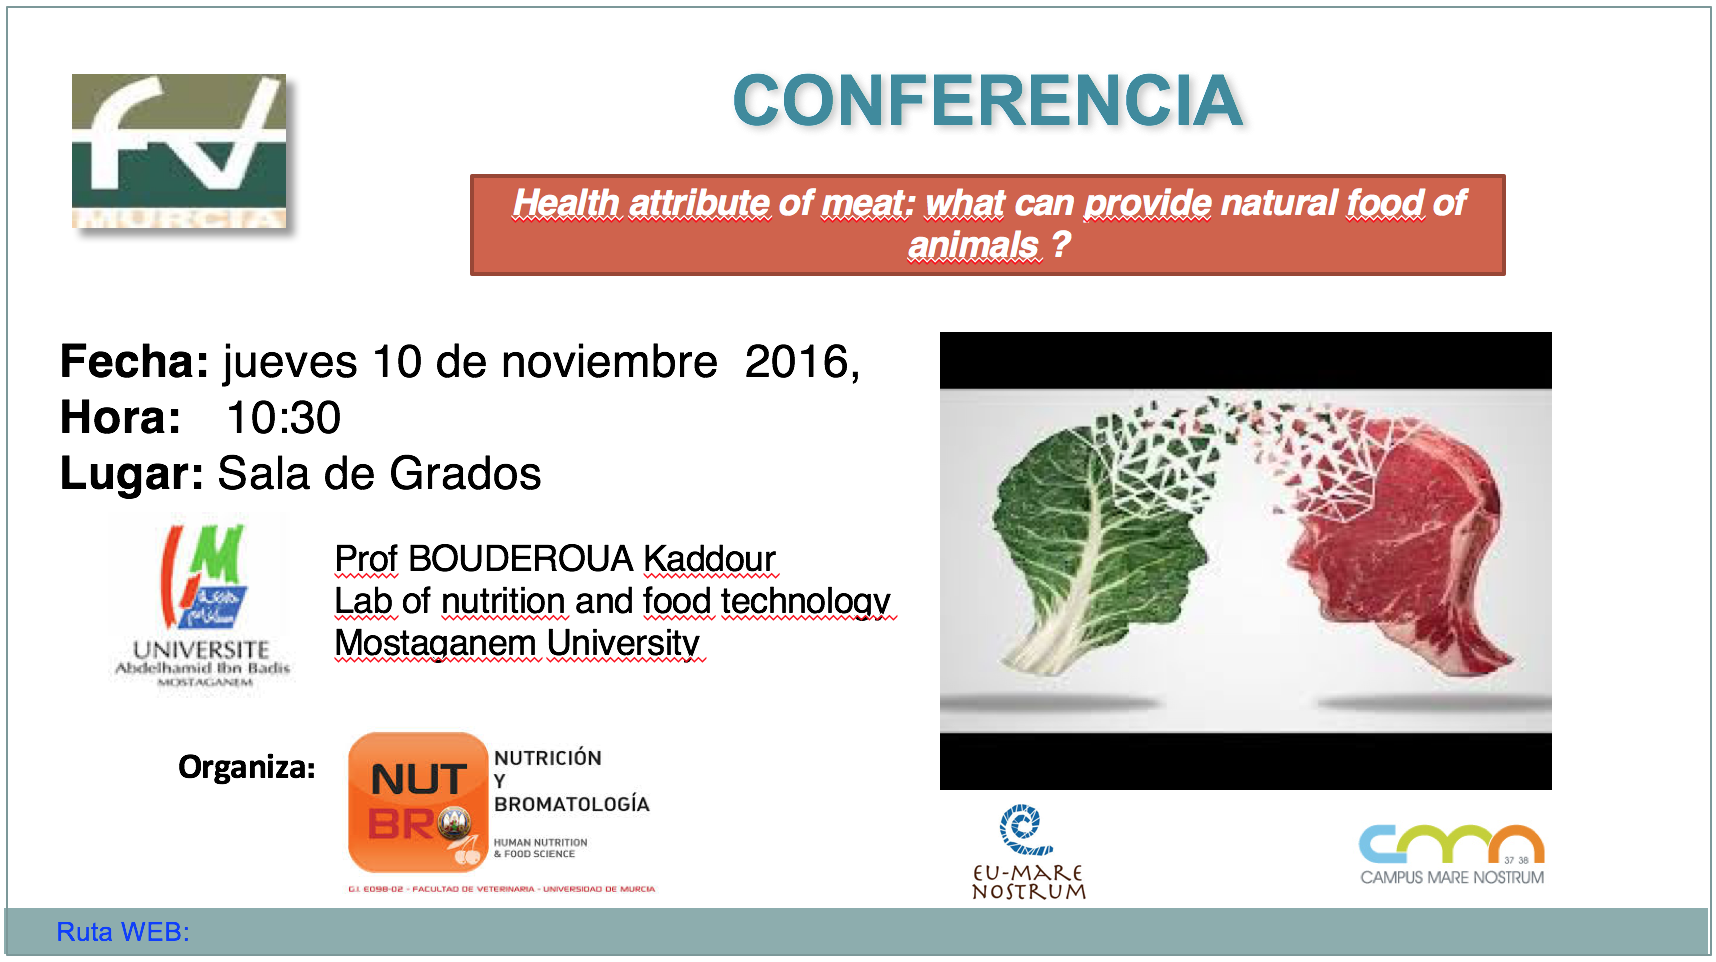 Health attribute of meat: what can provide natural food of animals?